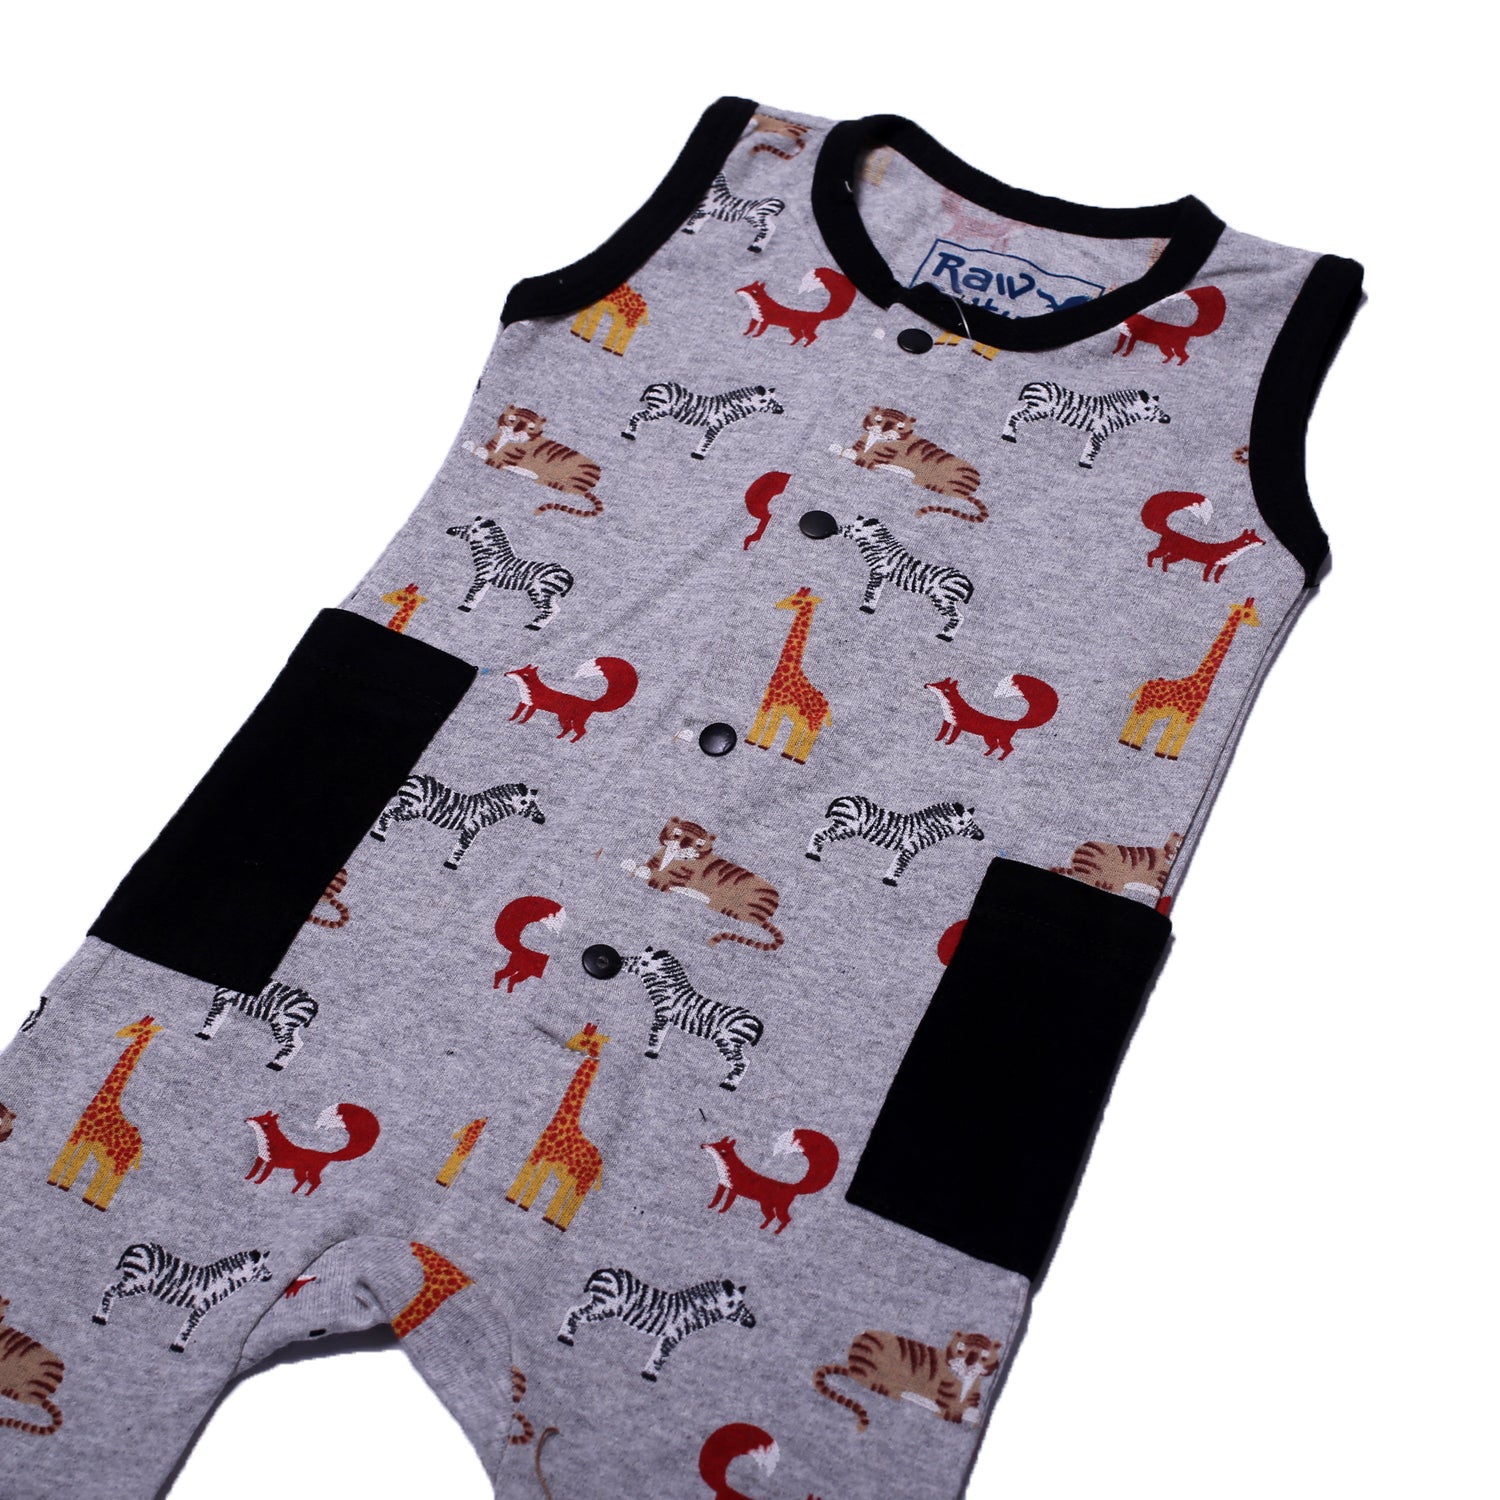 LIGHT GREY FULL BODY SLEEVE LESS ANIMALS WITH POCKETS PRINTED ROMPER